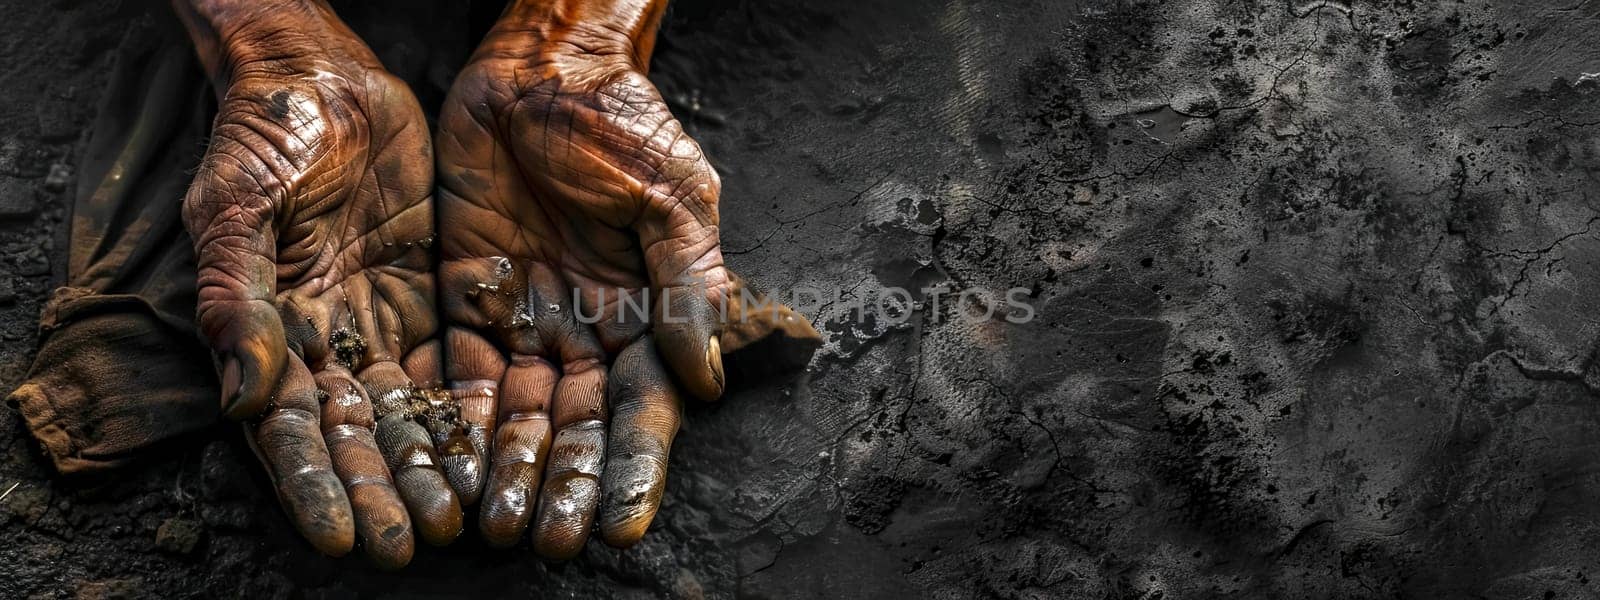 Weathered Hands Open on Textured Surface by Edophoto